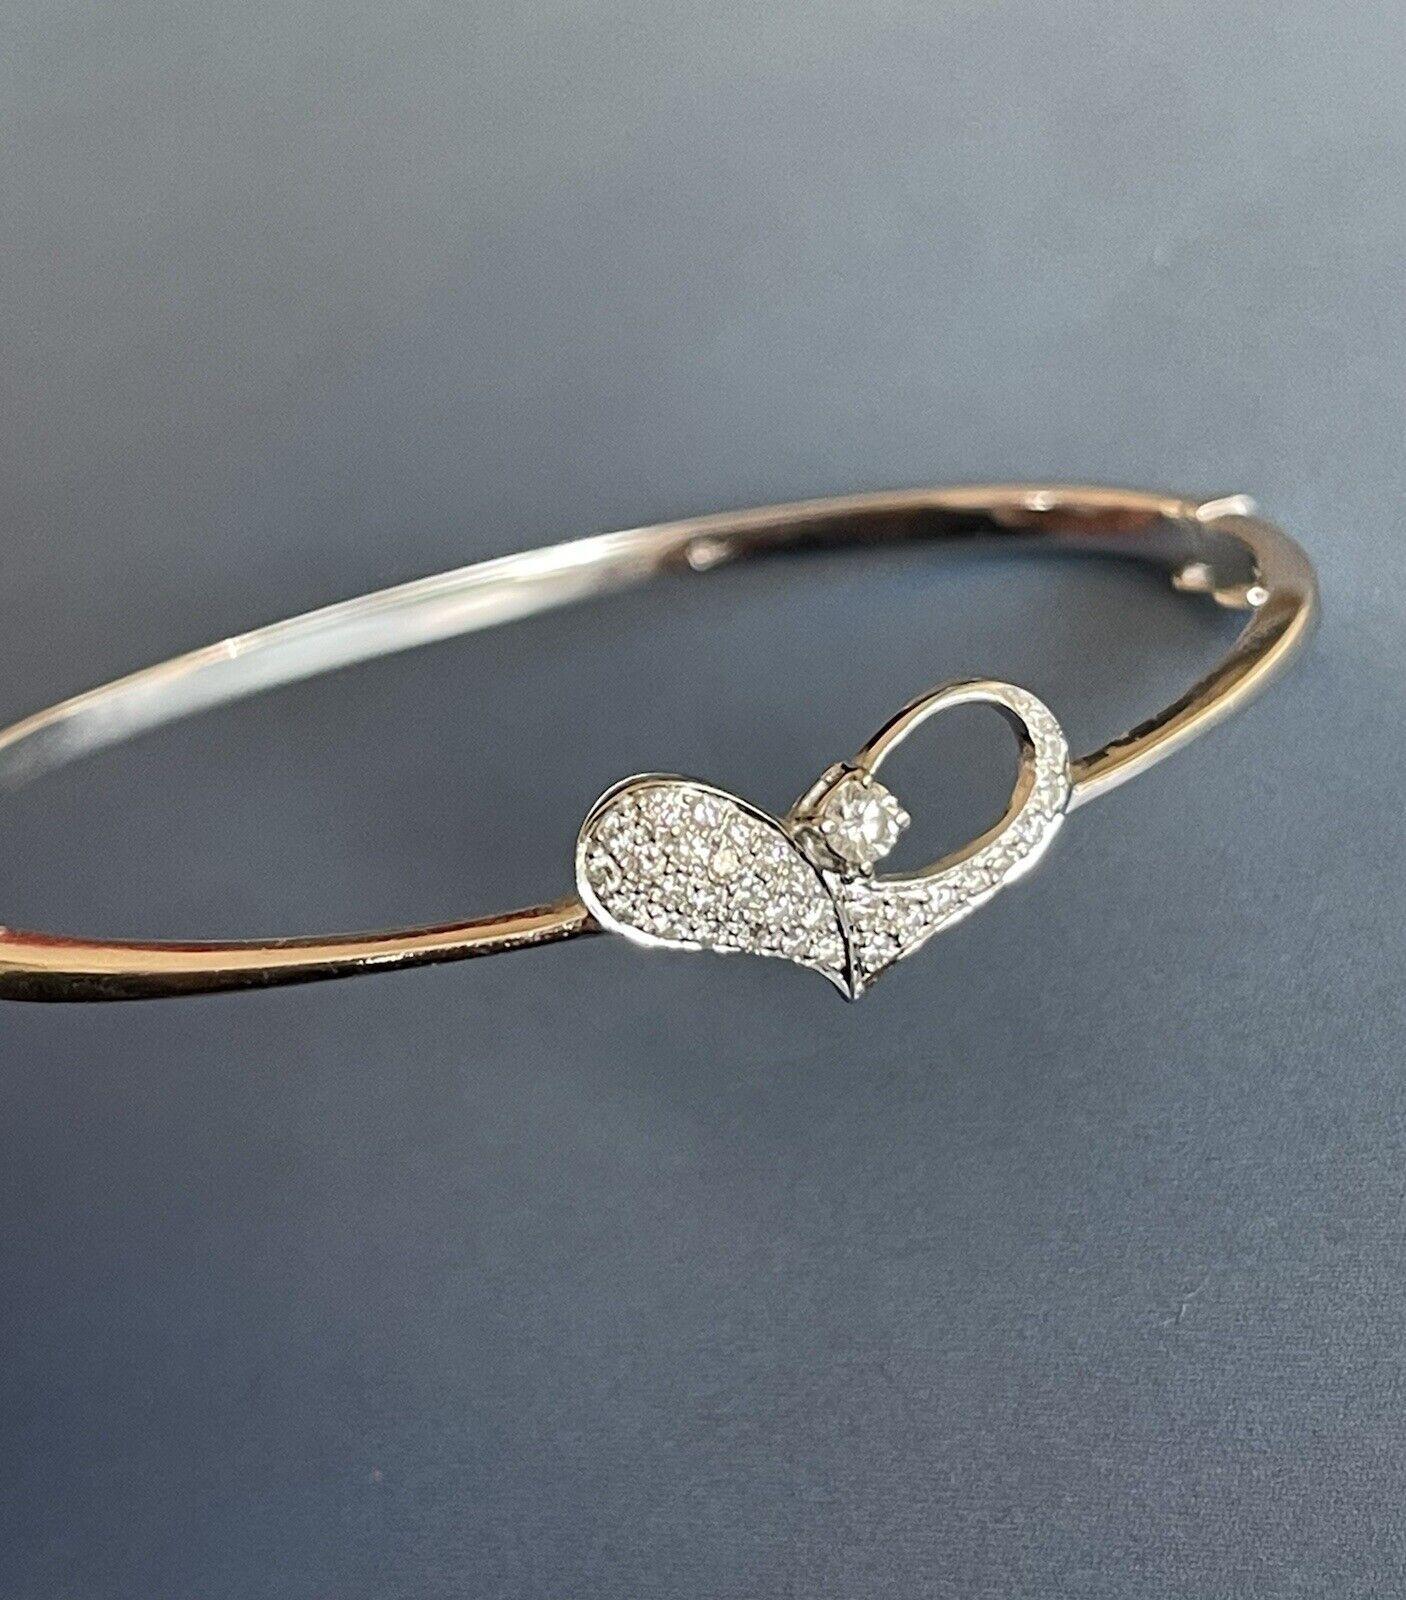 18ct White Gold Diamond Bangle 0.50ct Heart Detail Bracelet Half Carat VS In New Condition For Sale In Ilford, GB